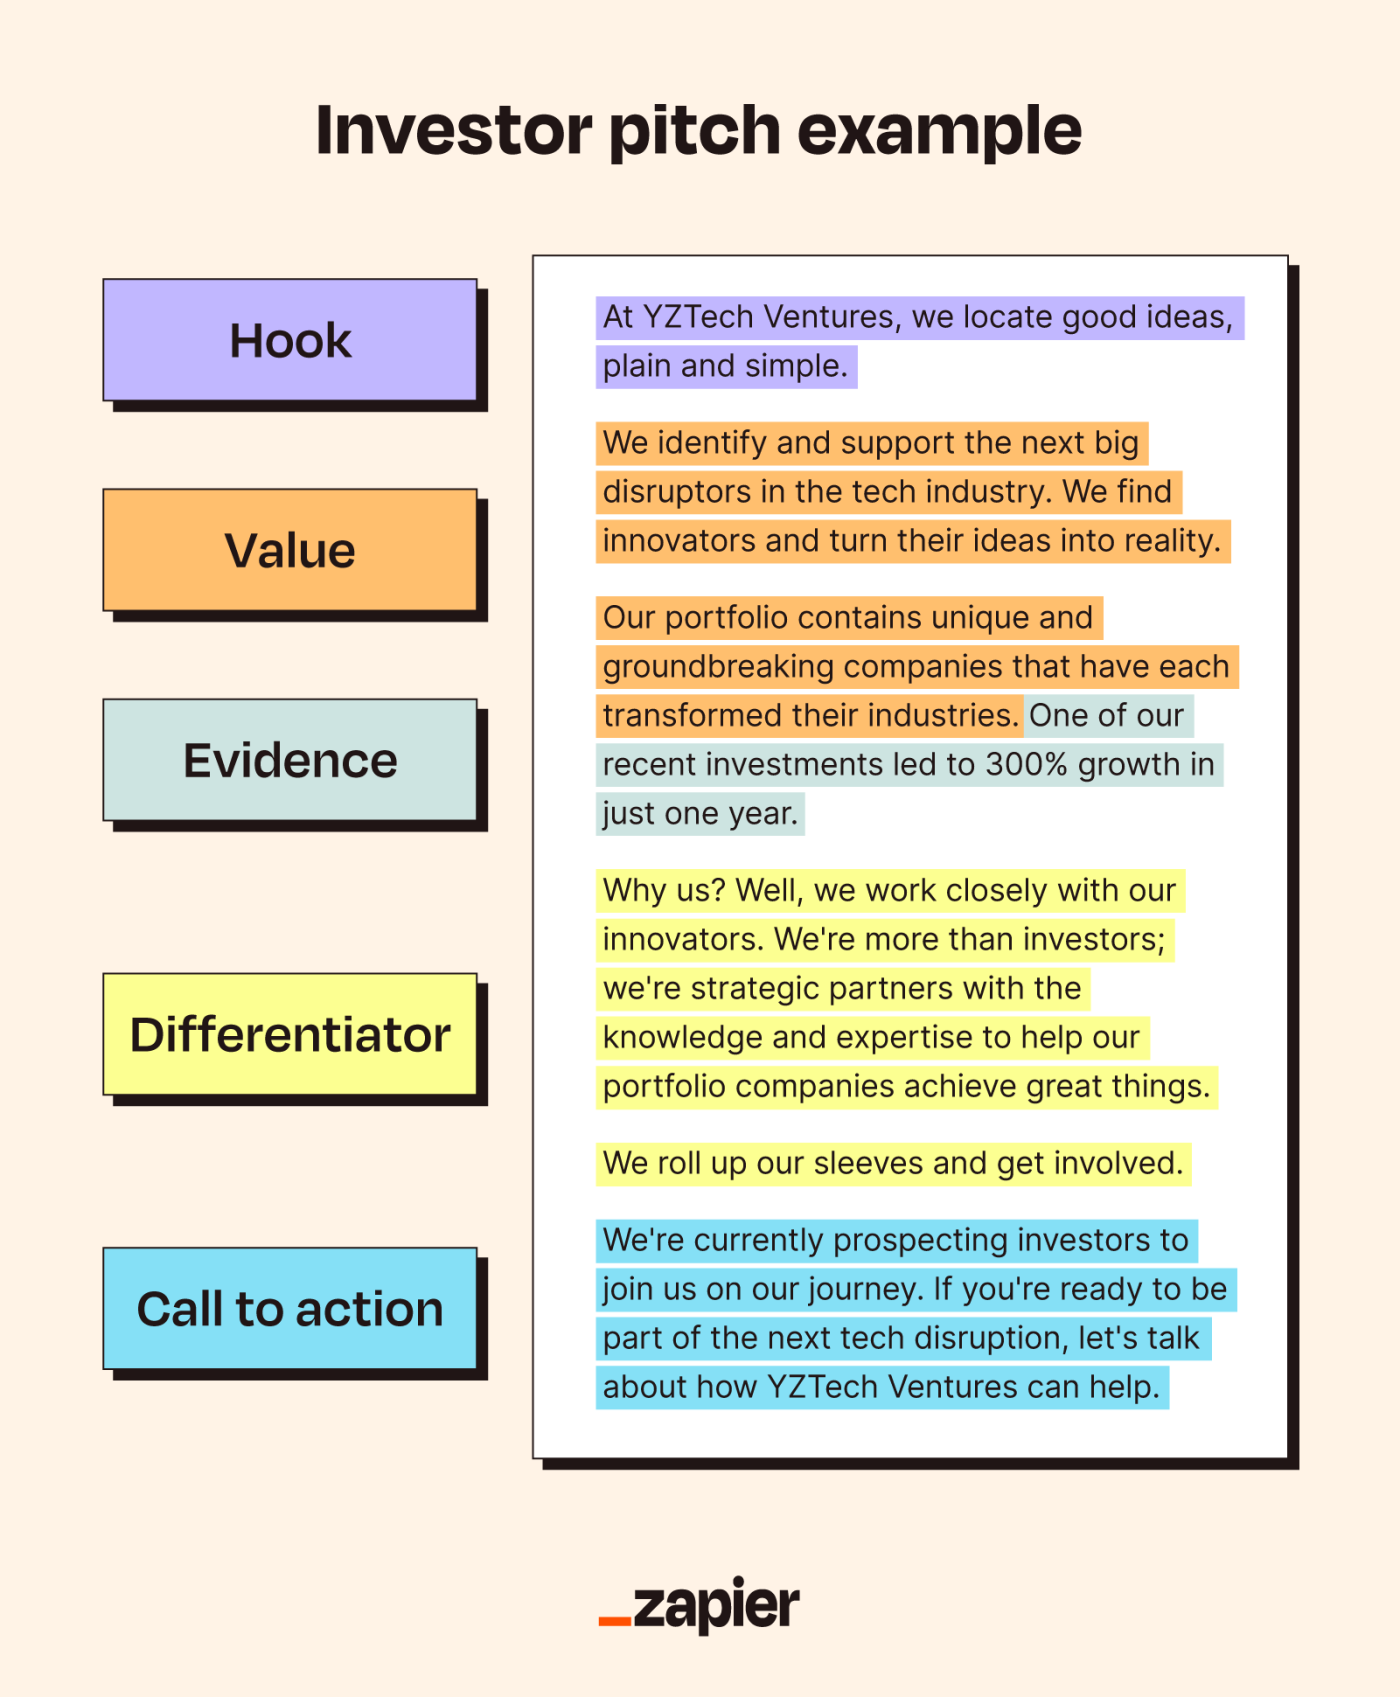 Example of an elevator pitch for someone looking for investors, with the hook, value, evidence, differentiator, and call to action highlighted in different colors